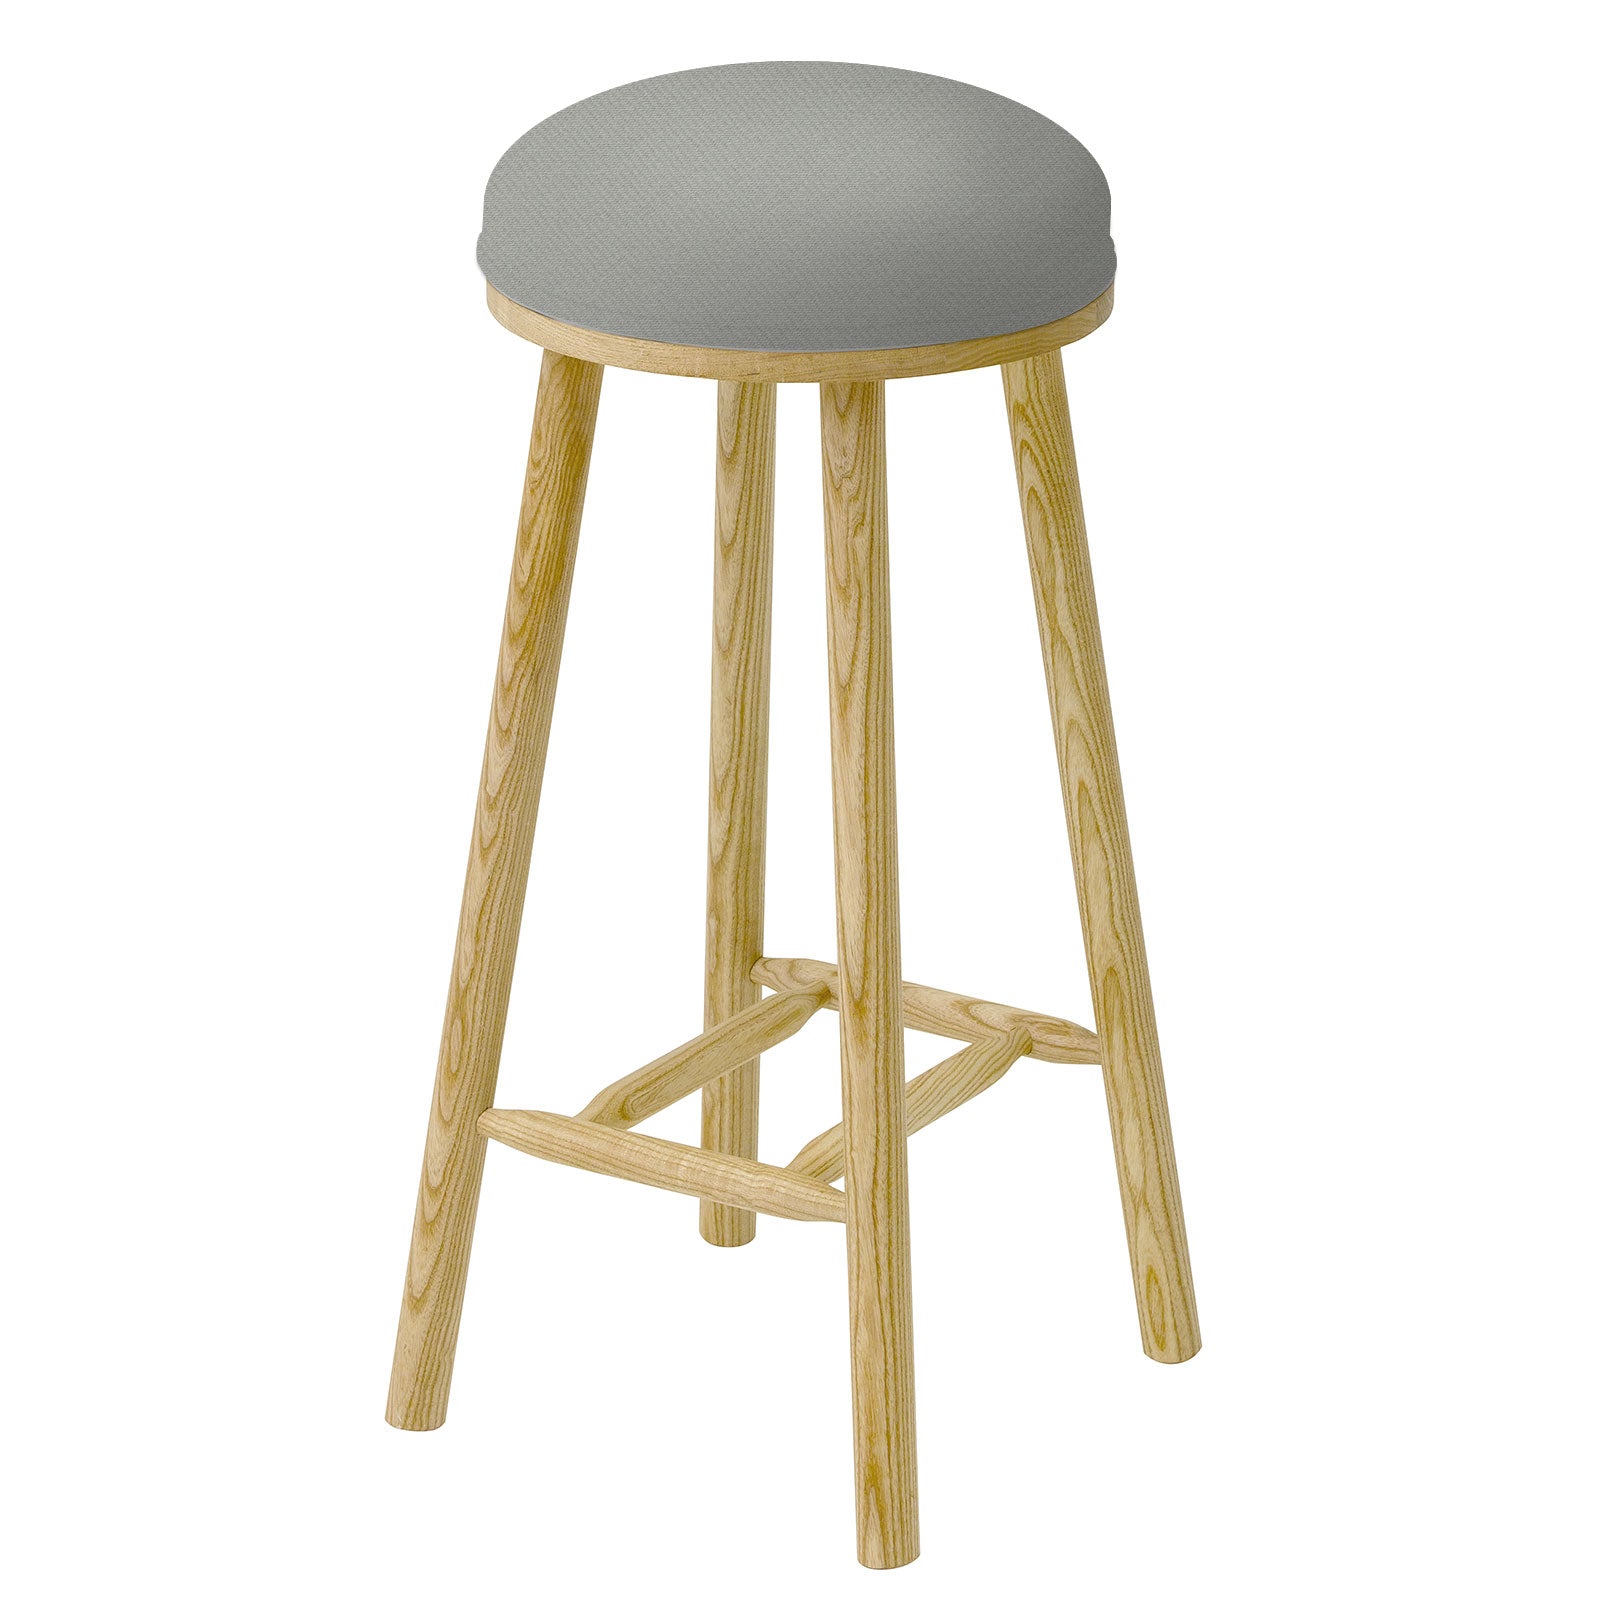 Turner Counter Stool made-to-order in your chosen colourway.